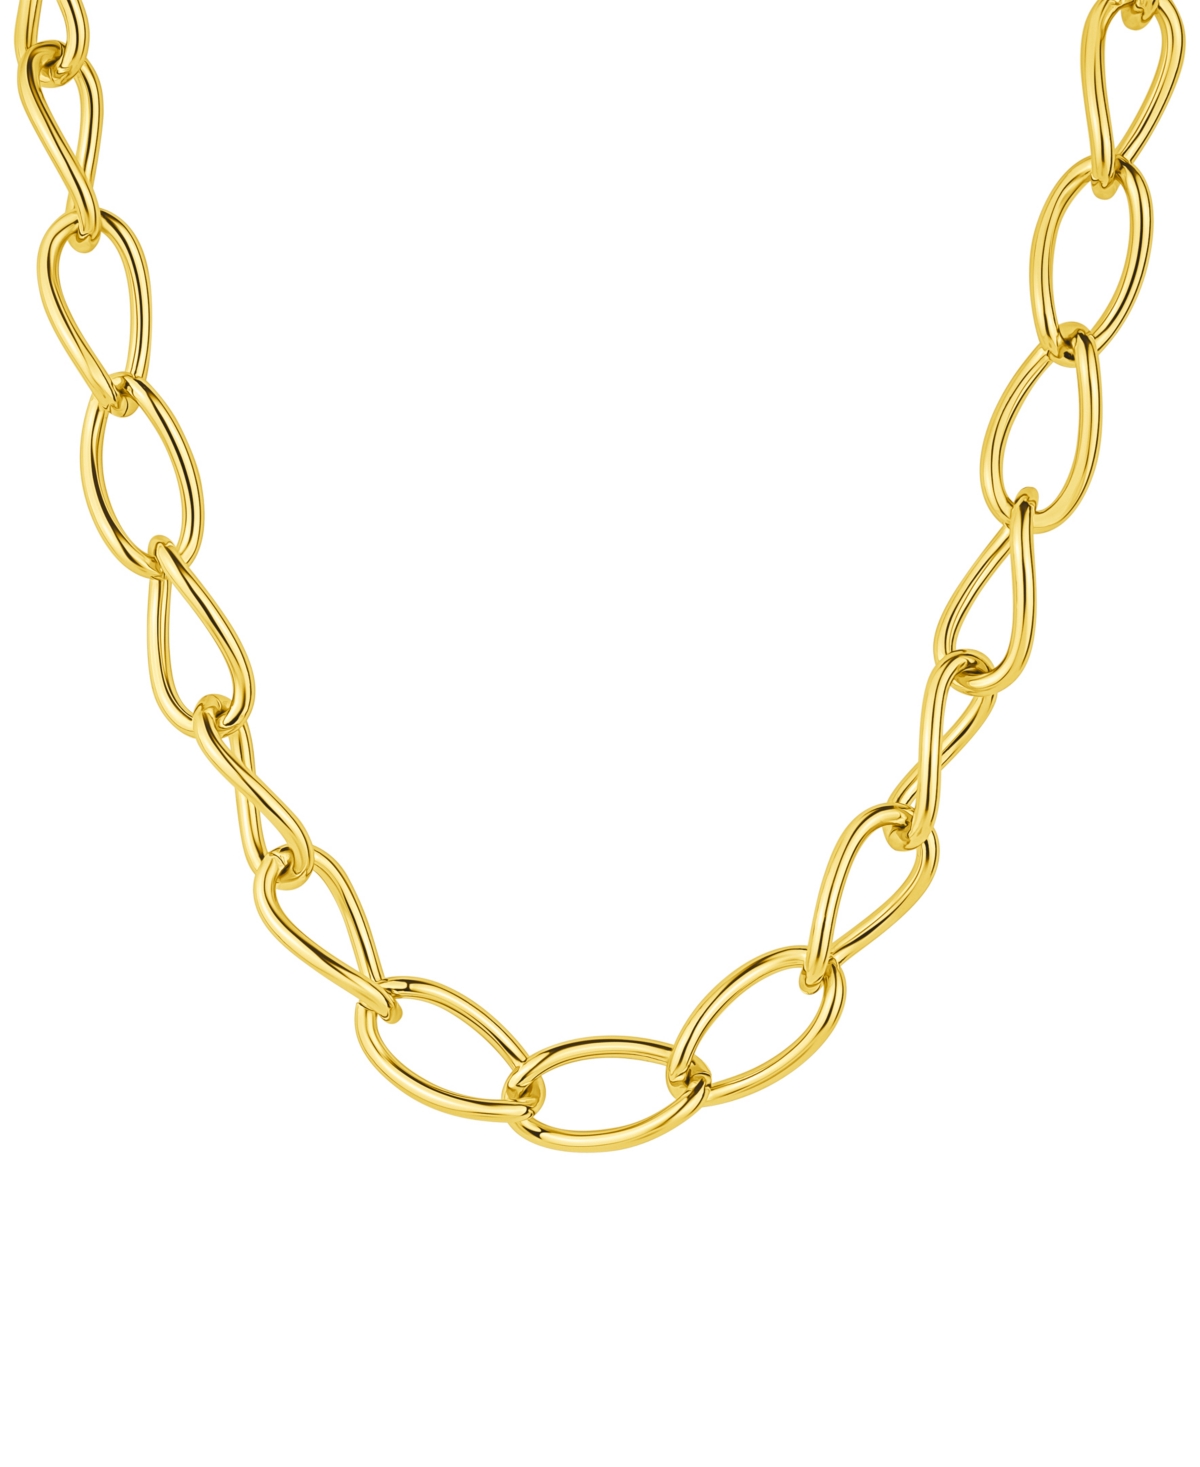 Oval Twist Link Necklace in 18K Gold Plated Brass - K Gold Plated